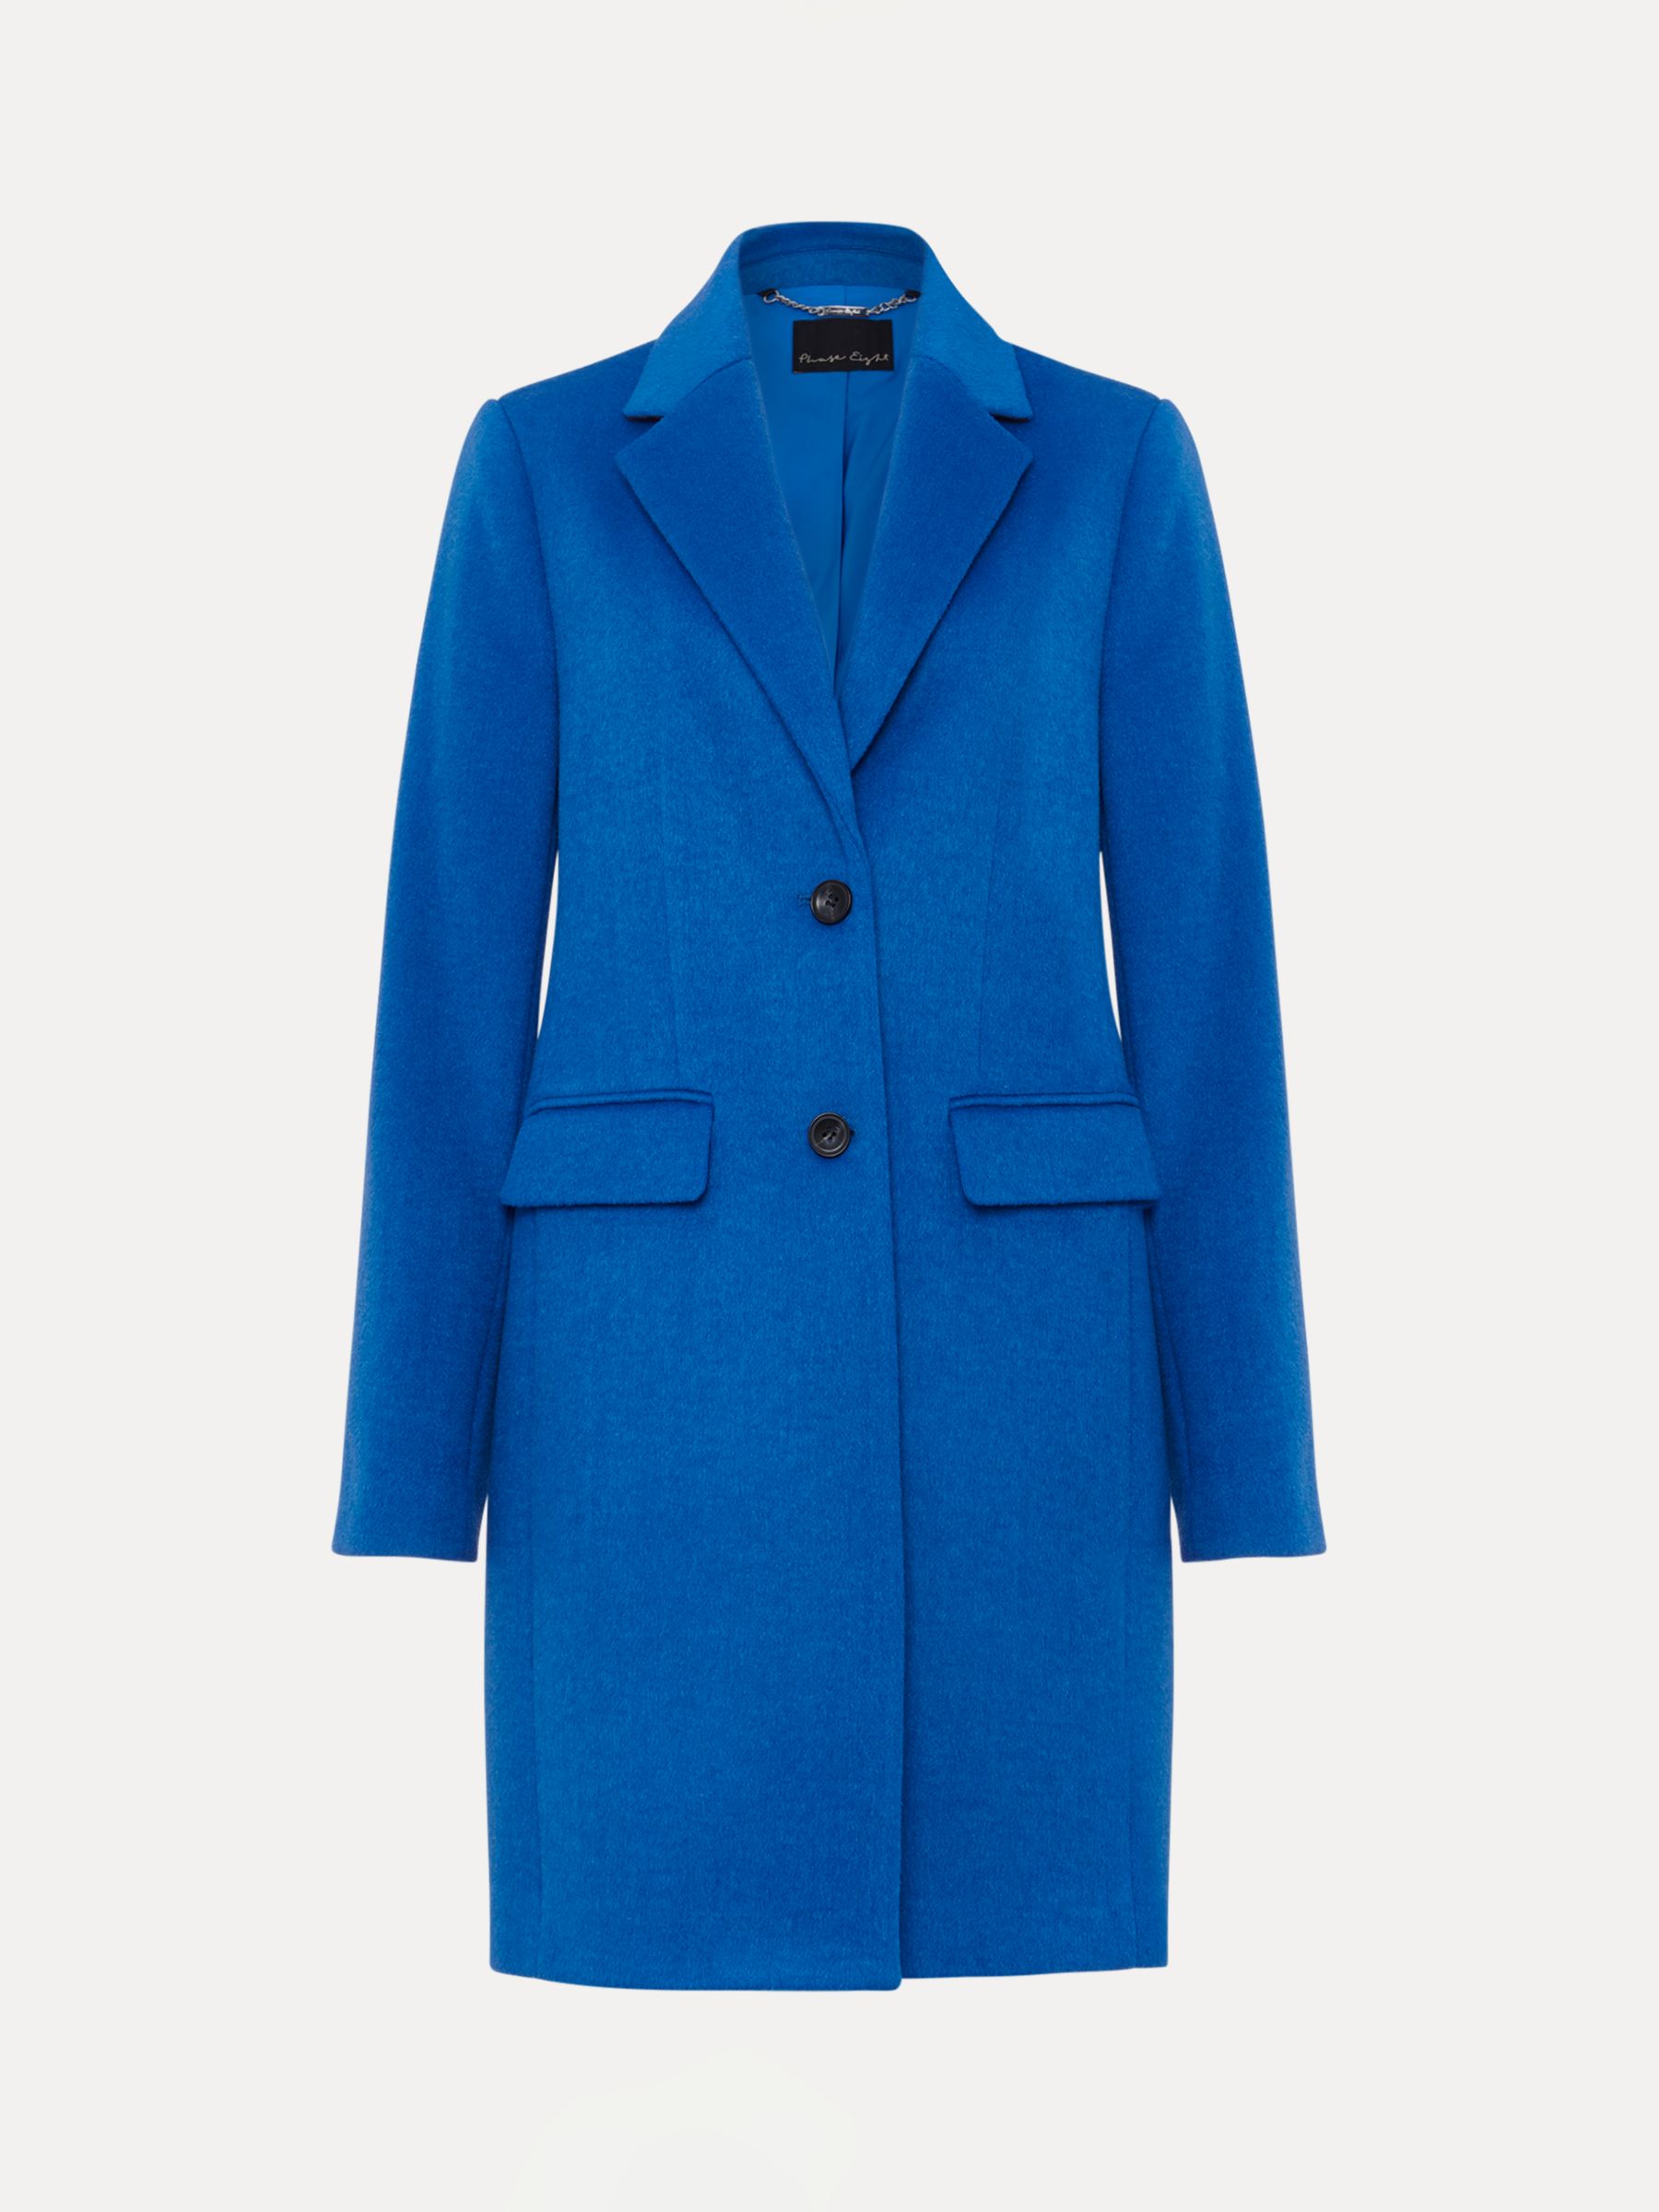 Phase Eight Lydia Wool Blend Coat, Teal at John Lewis & Partners